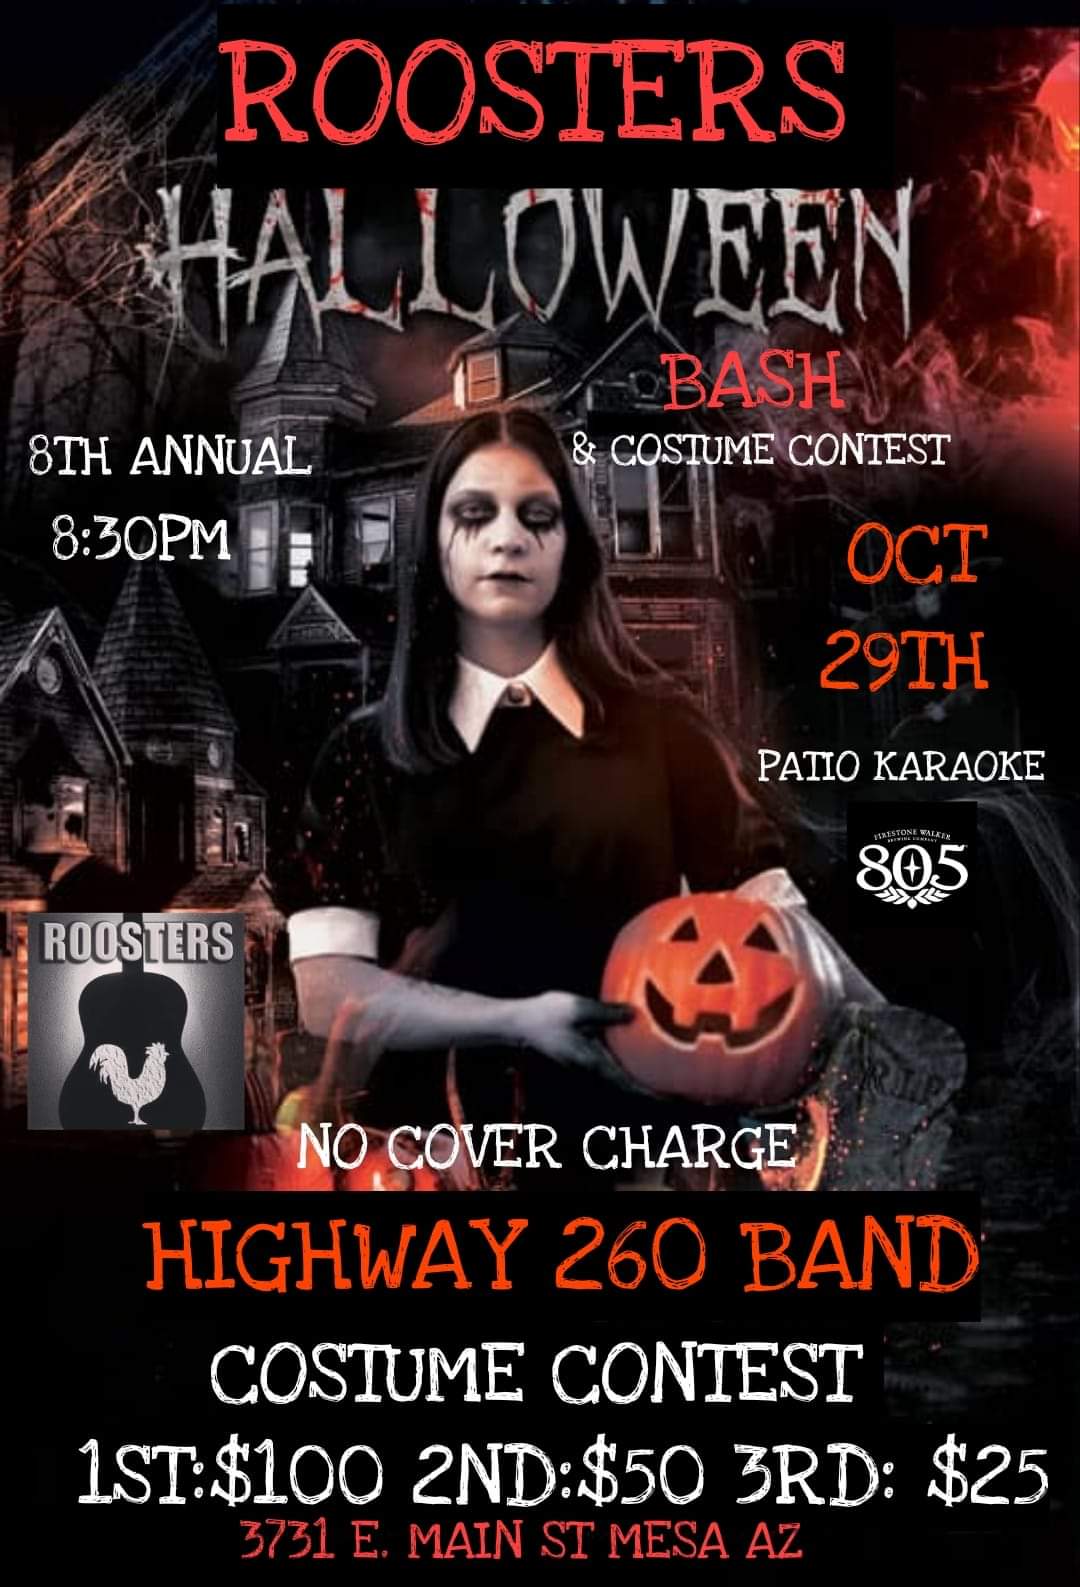 Roosters 8th Annual Halloween Bash with Highway 260 Band Live